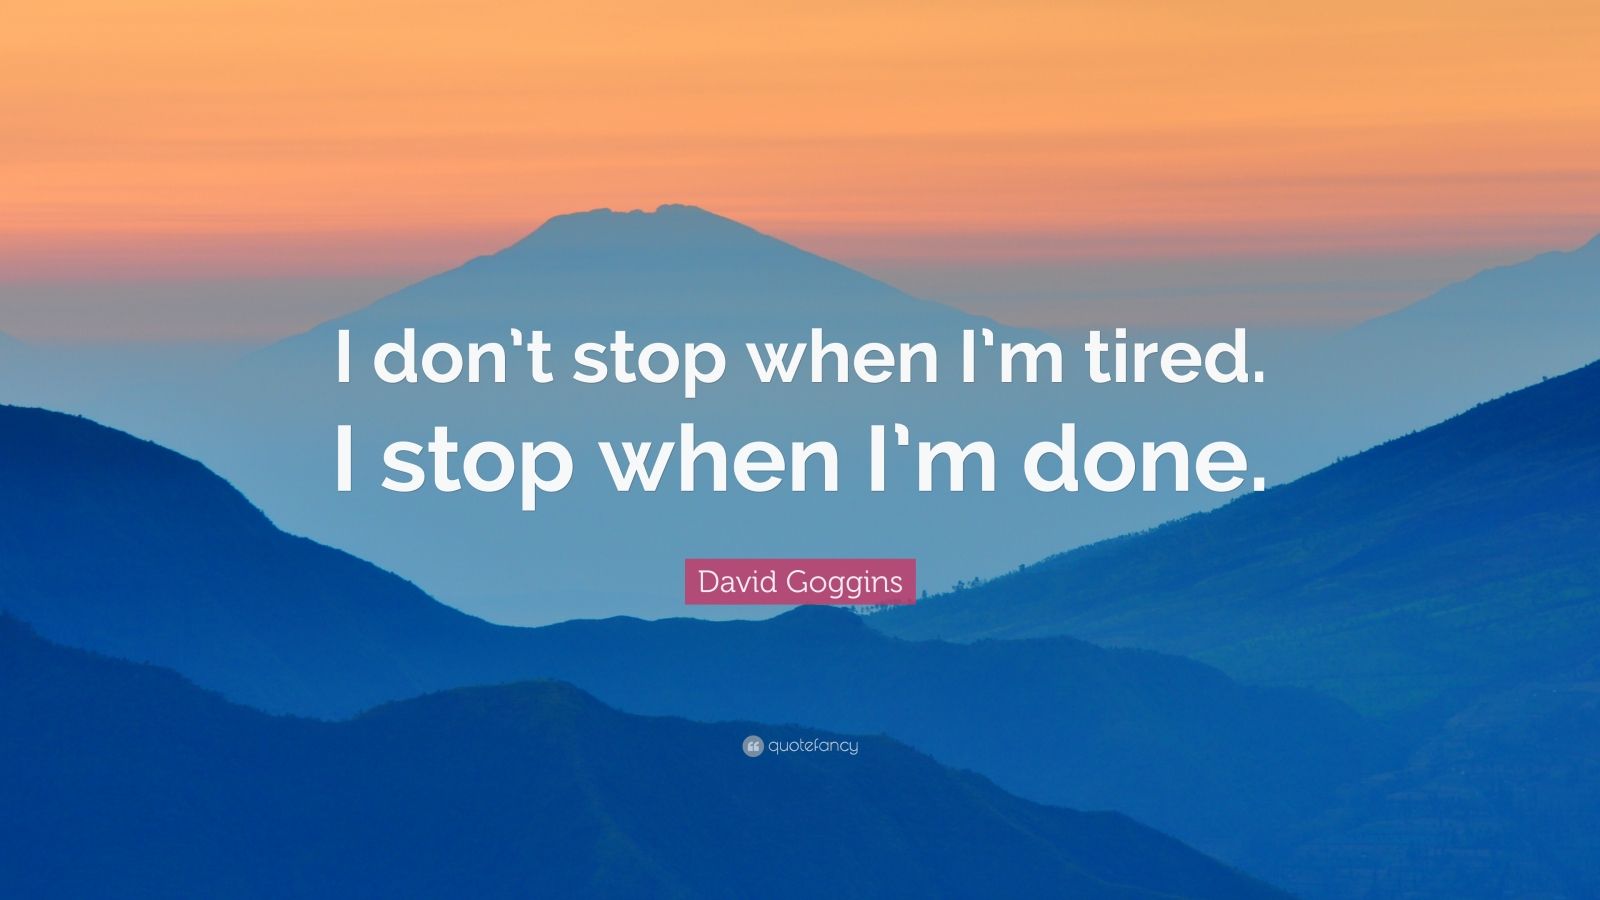 David Goggins Quote: “I don’t stop when I’m tired. I stop when I’m done